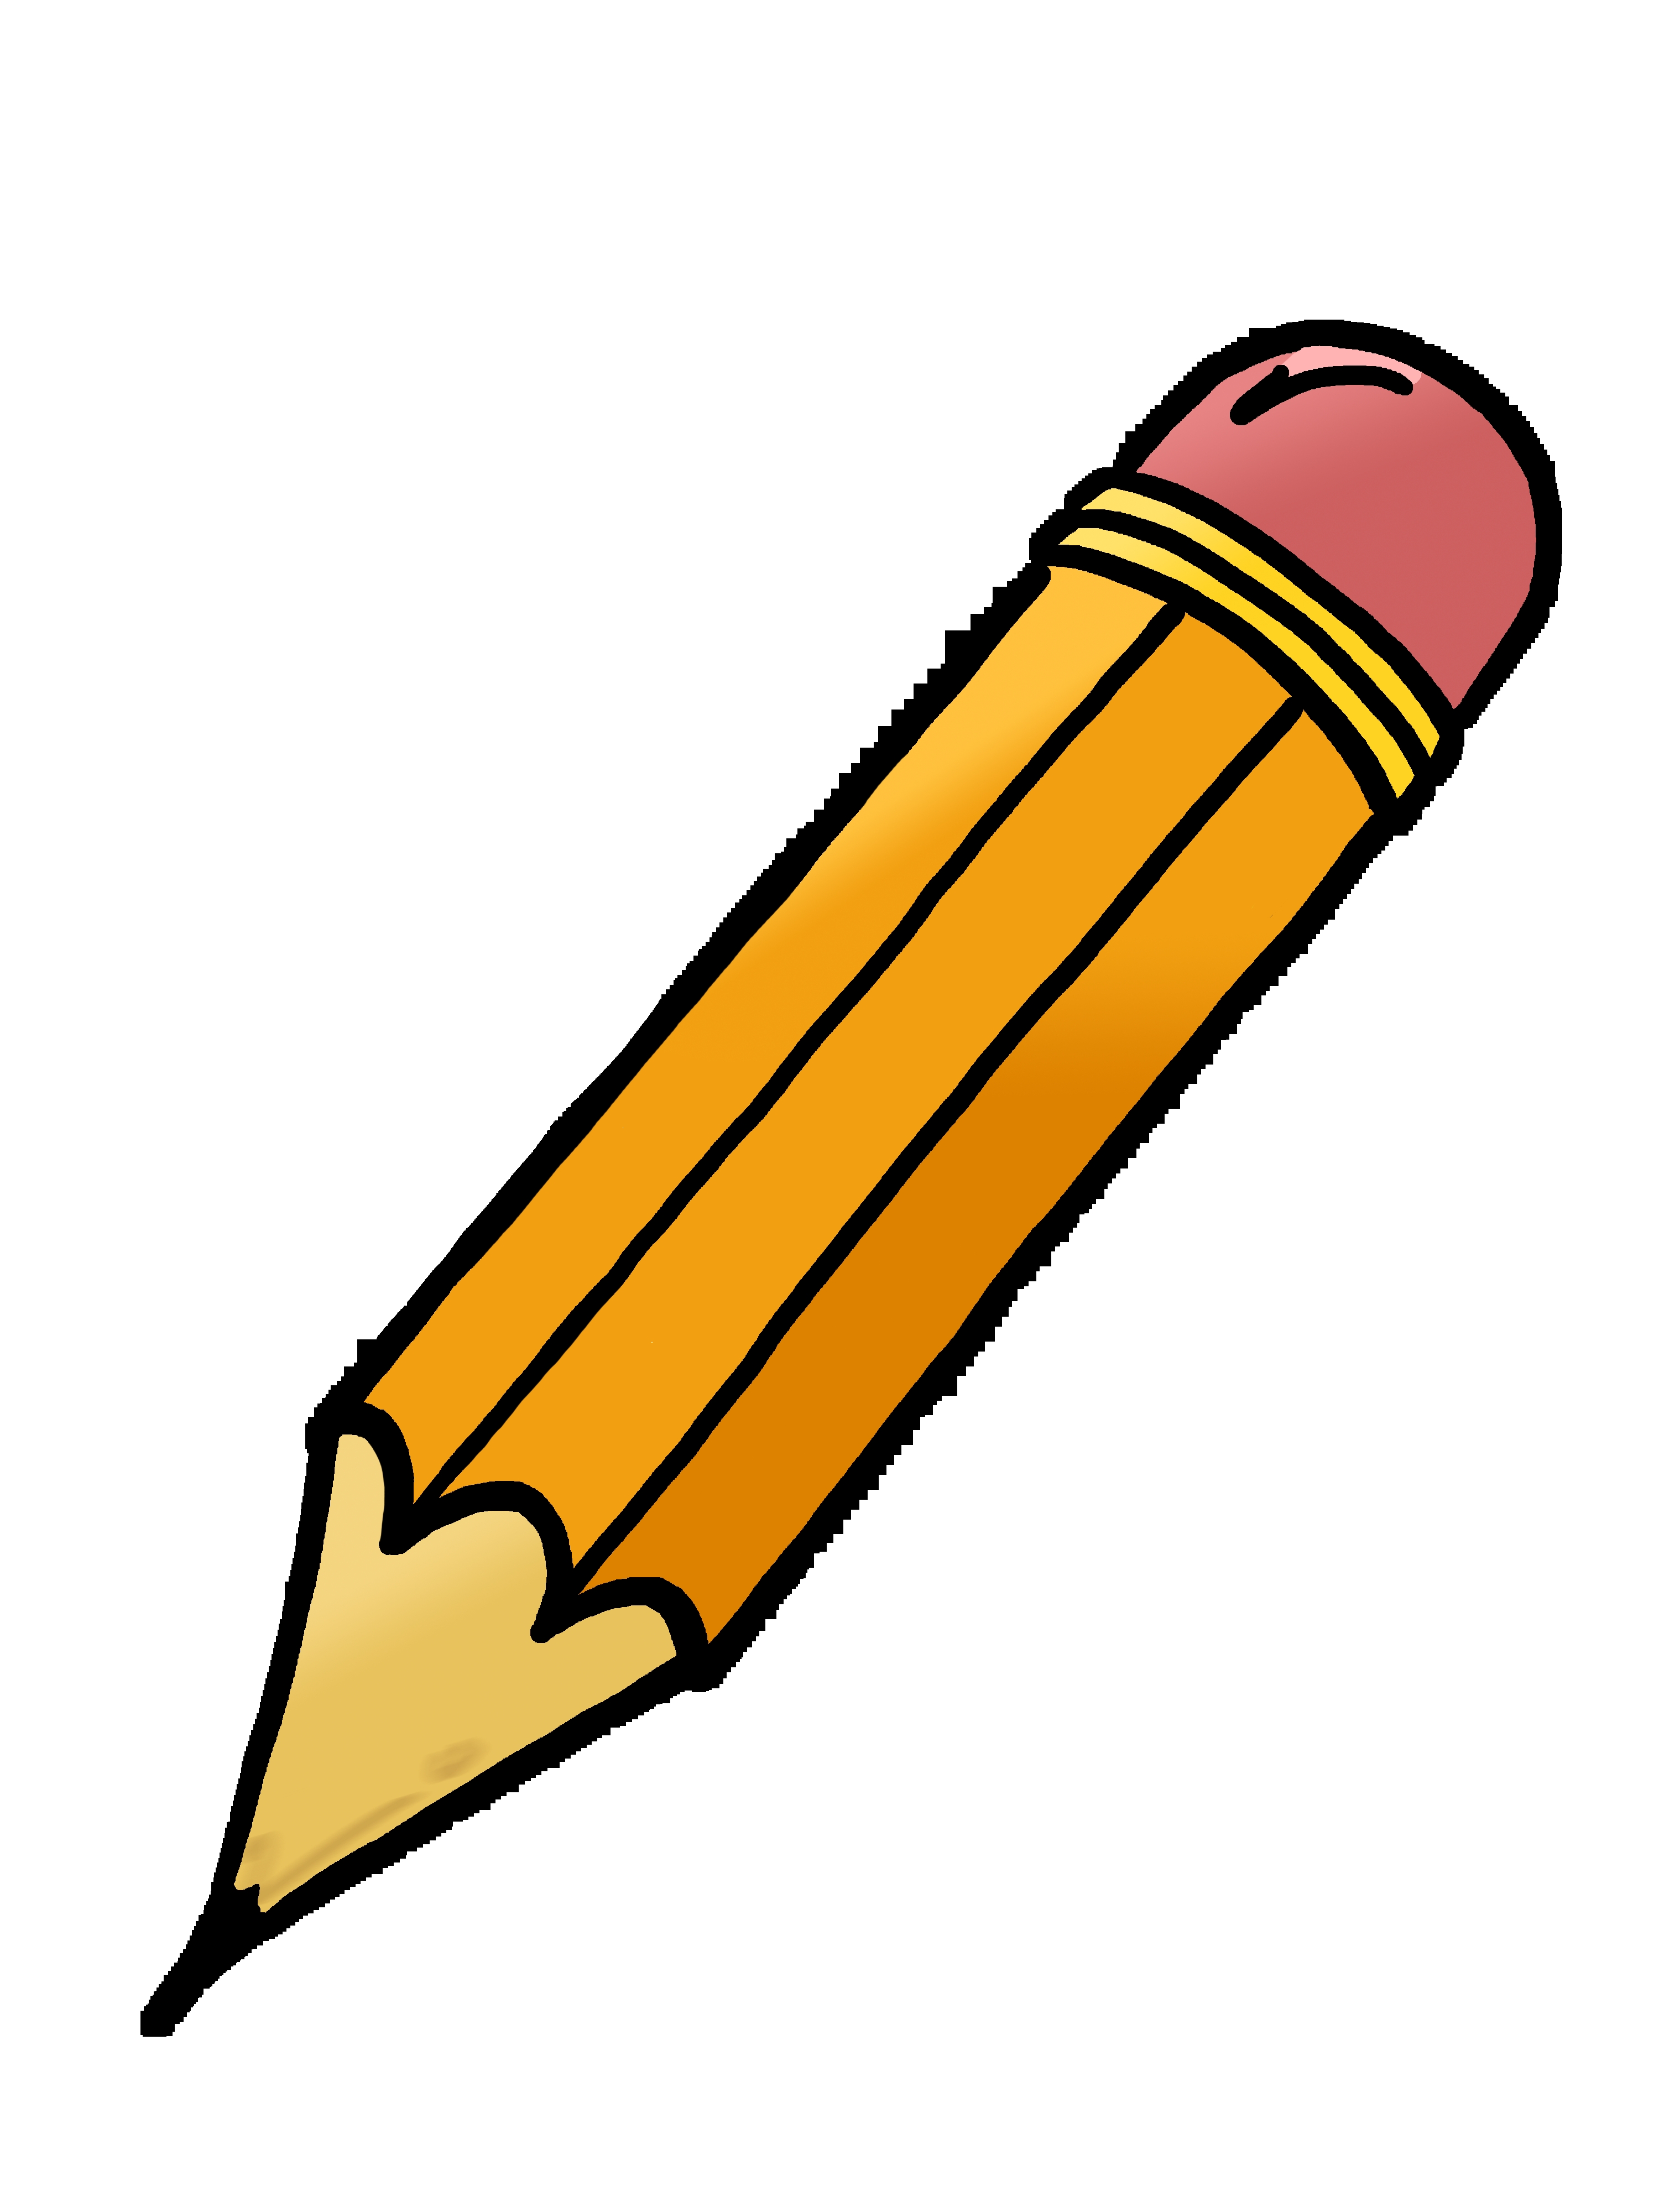 Fresh gallery digital collection. Pencils clipart